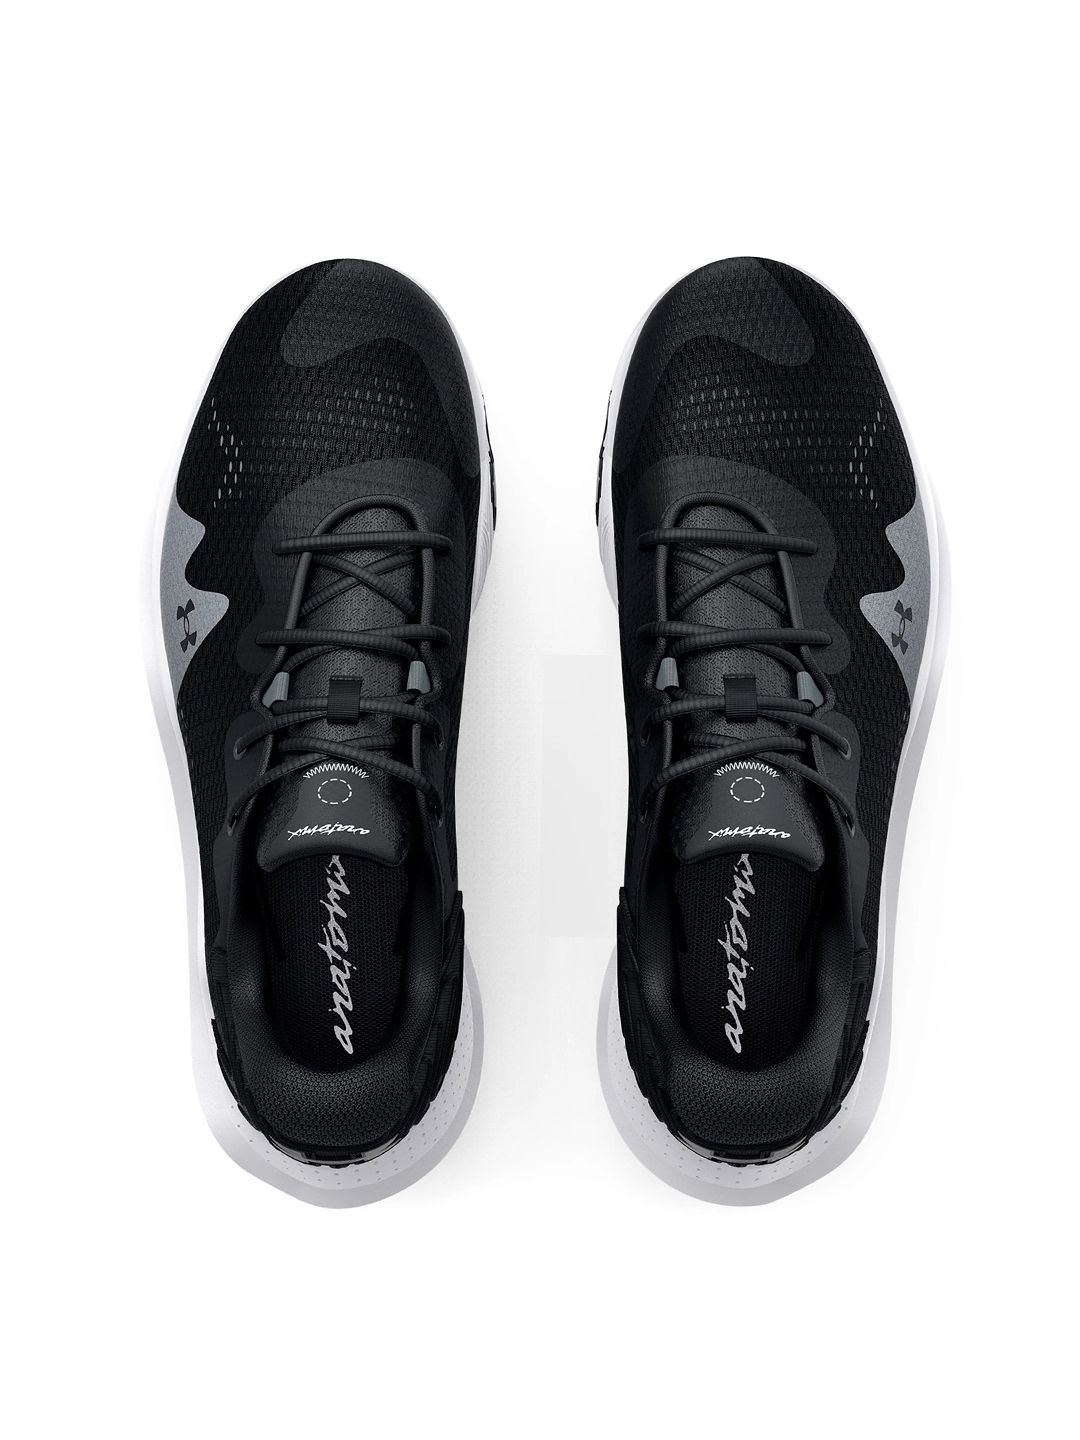 UNDER ARMOUR Unisex Black Spawn 4 Basketball Shoes Price in India